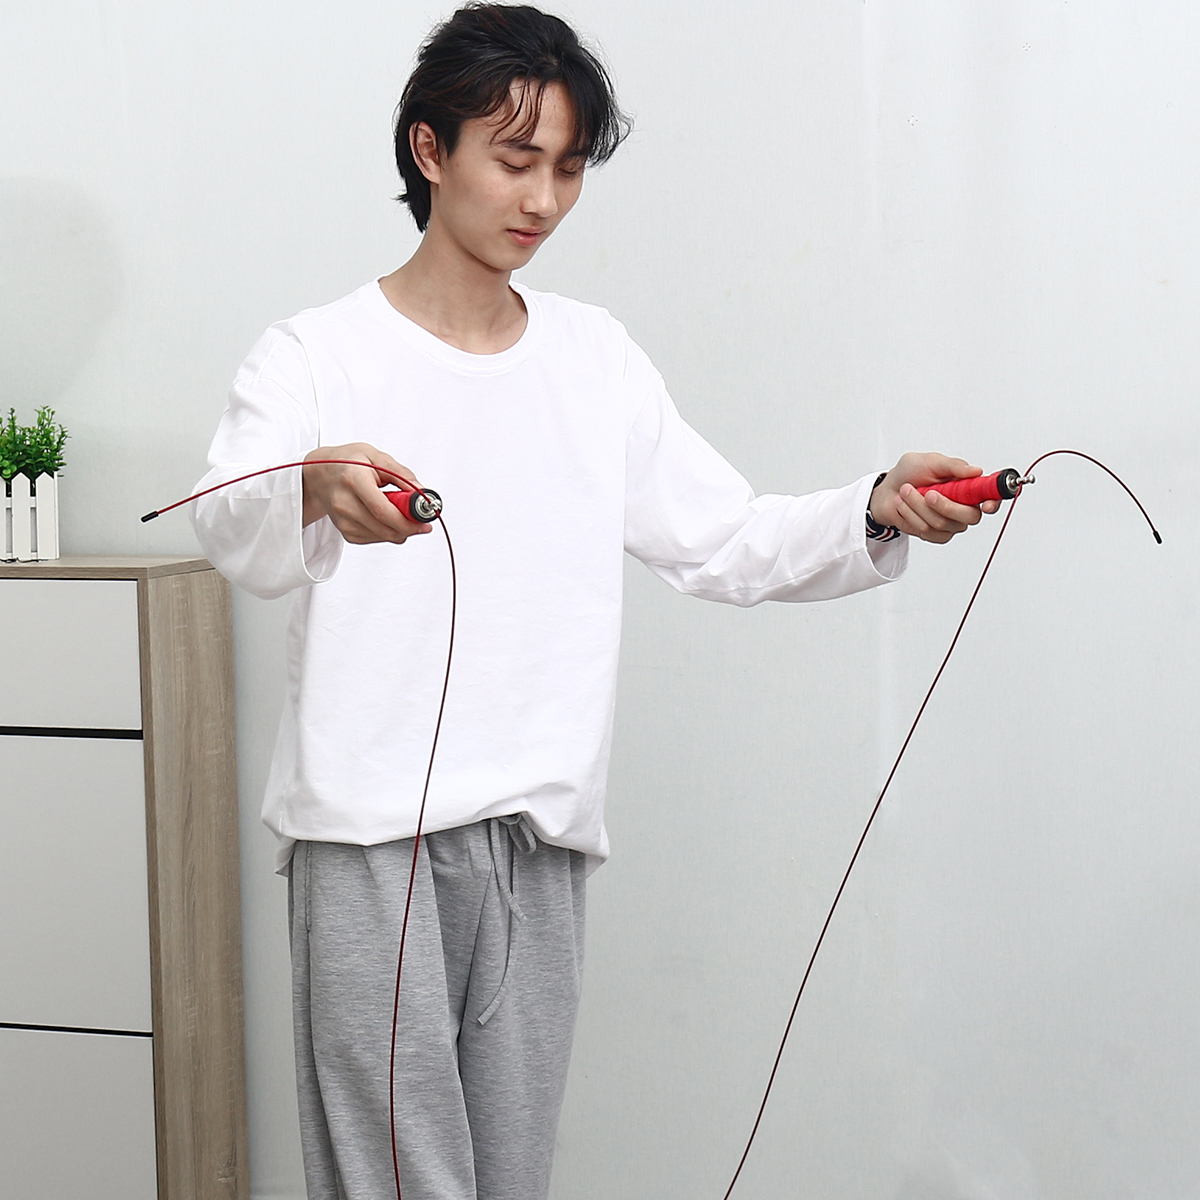 300cm-Length-Rope-Jumping-High-Speed-Aerobic-Steel-Wire-Jump-Rope-Fitness-Equipment-Skipping-1679175-5